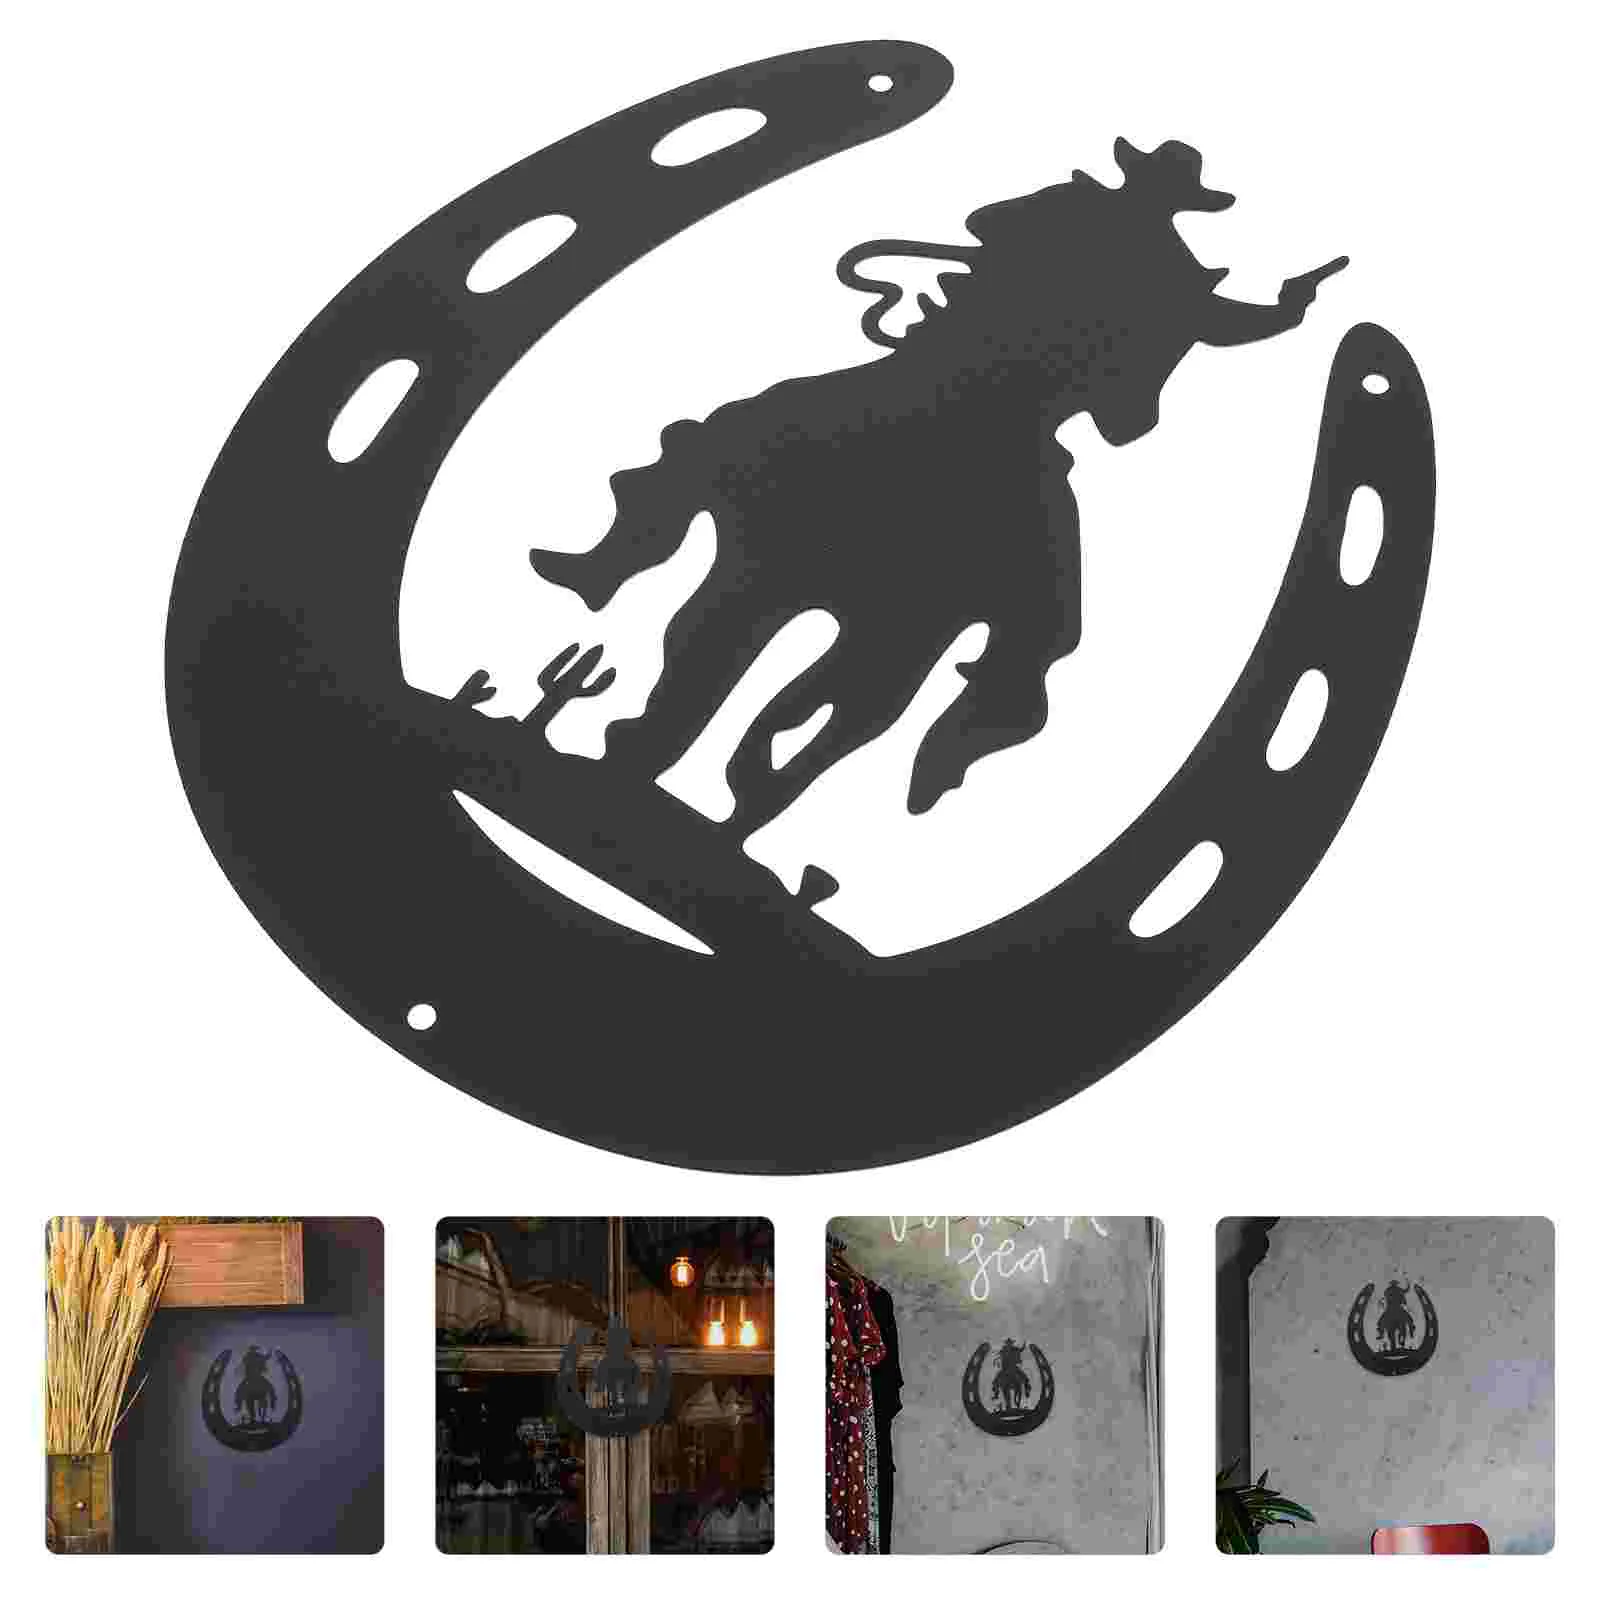 

Wall Horseshoe Decormetal Horseshoes Cowboy Iron Cast Room Goth Hanging Western Good Horse Silhouette Sculpture Luckydecoration